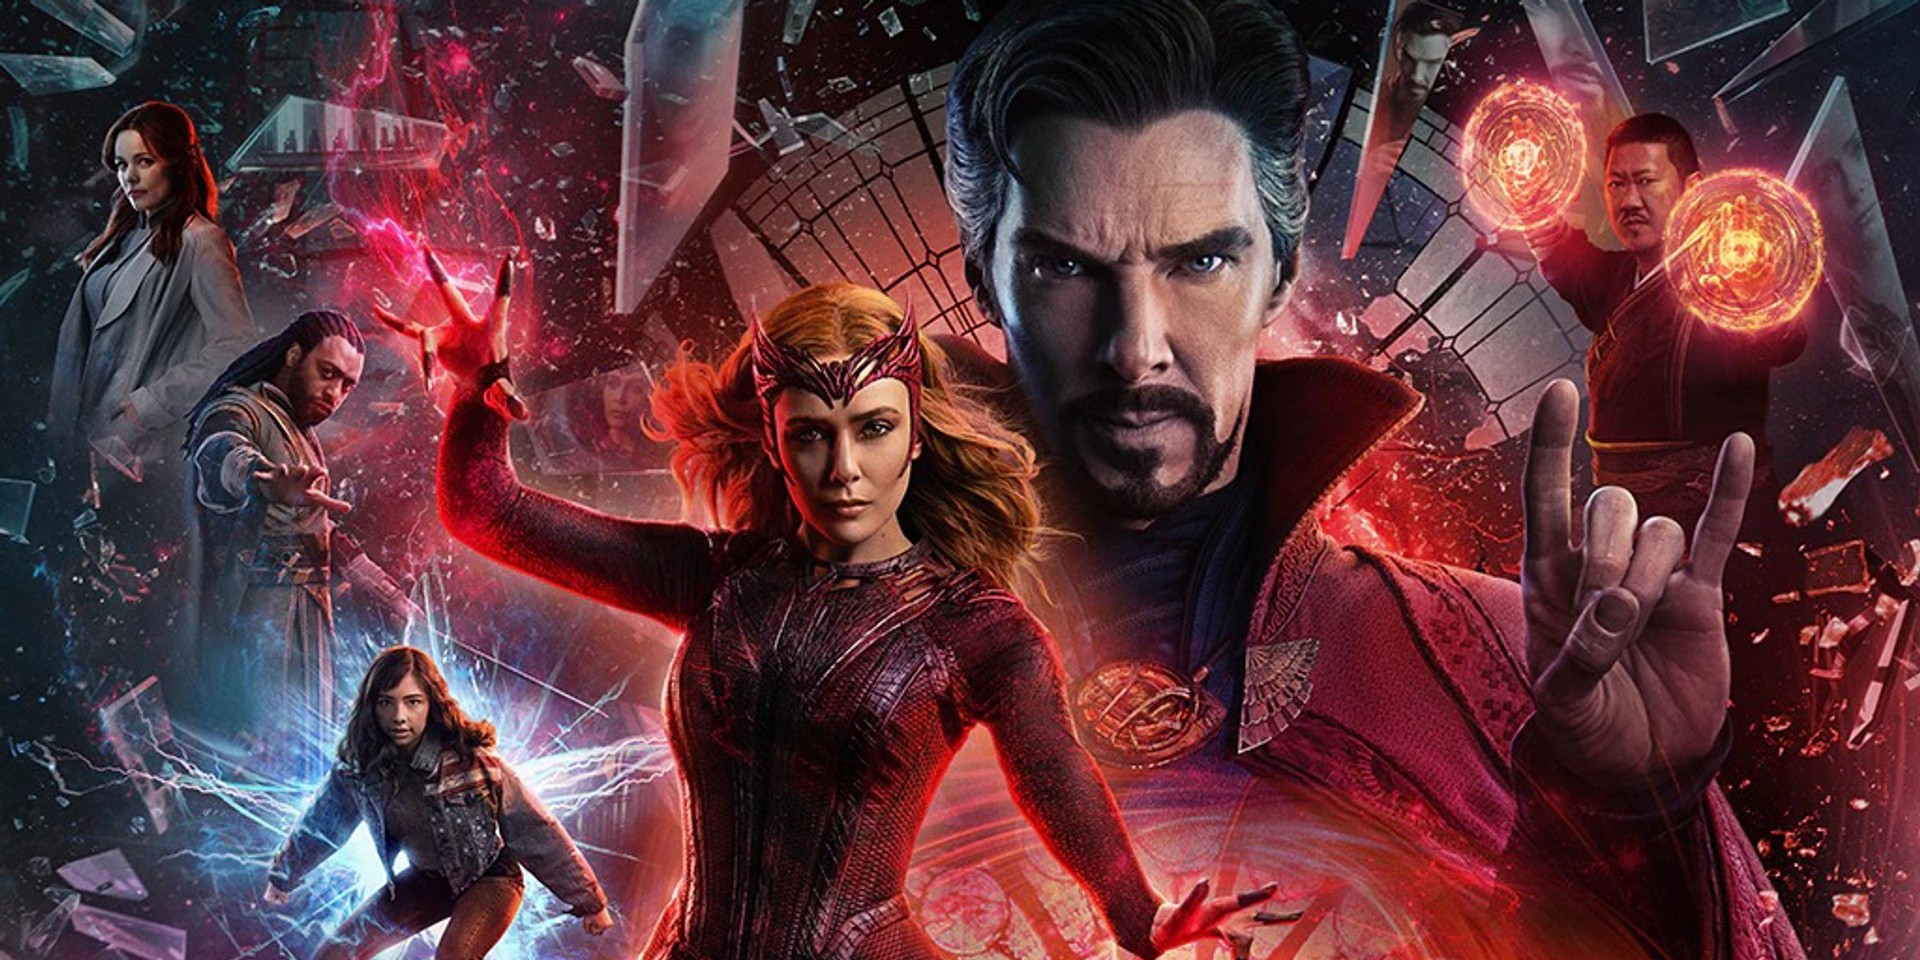 Marvel Studios' Doctor Strange in the Multiverse of Madness to premiere exclusively on Disney+ on June 22